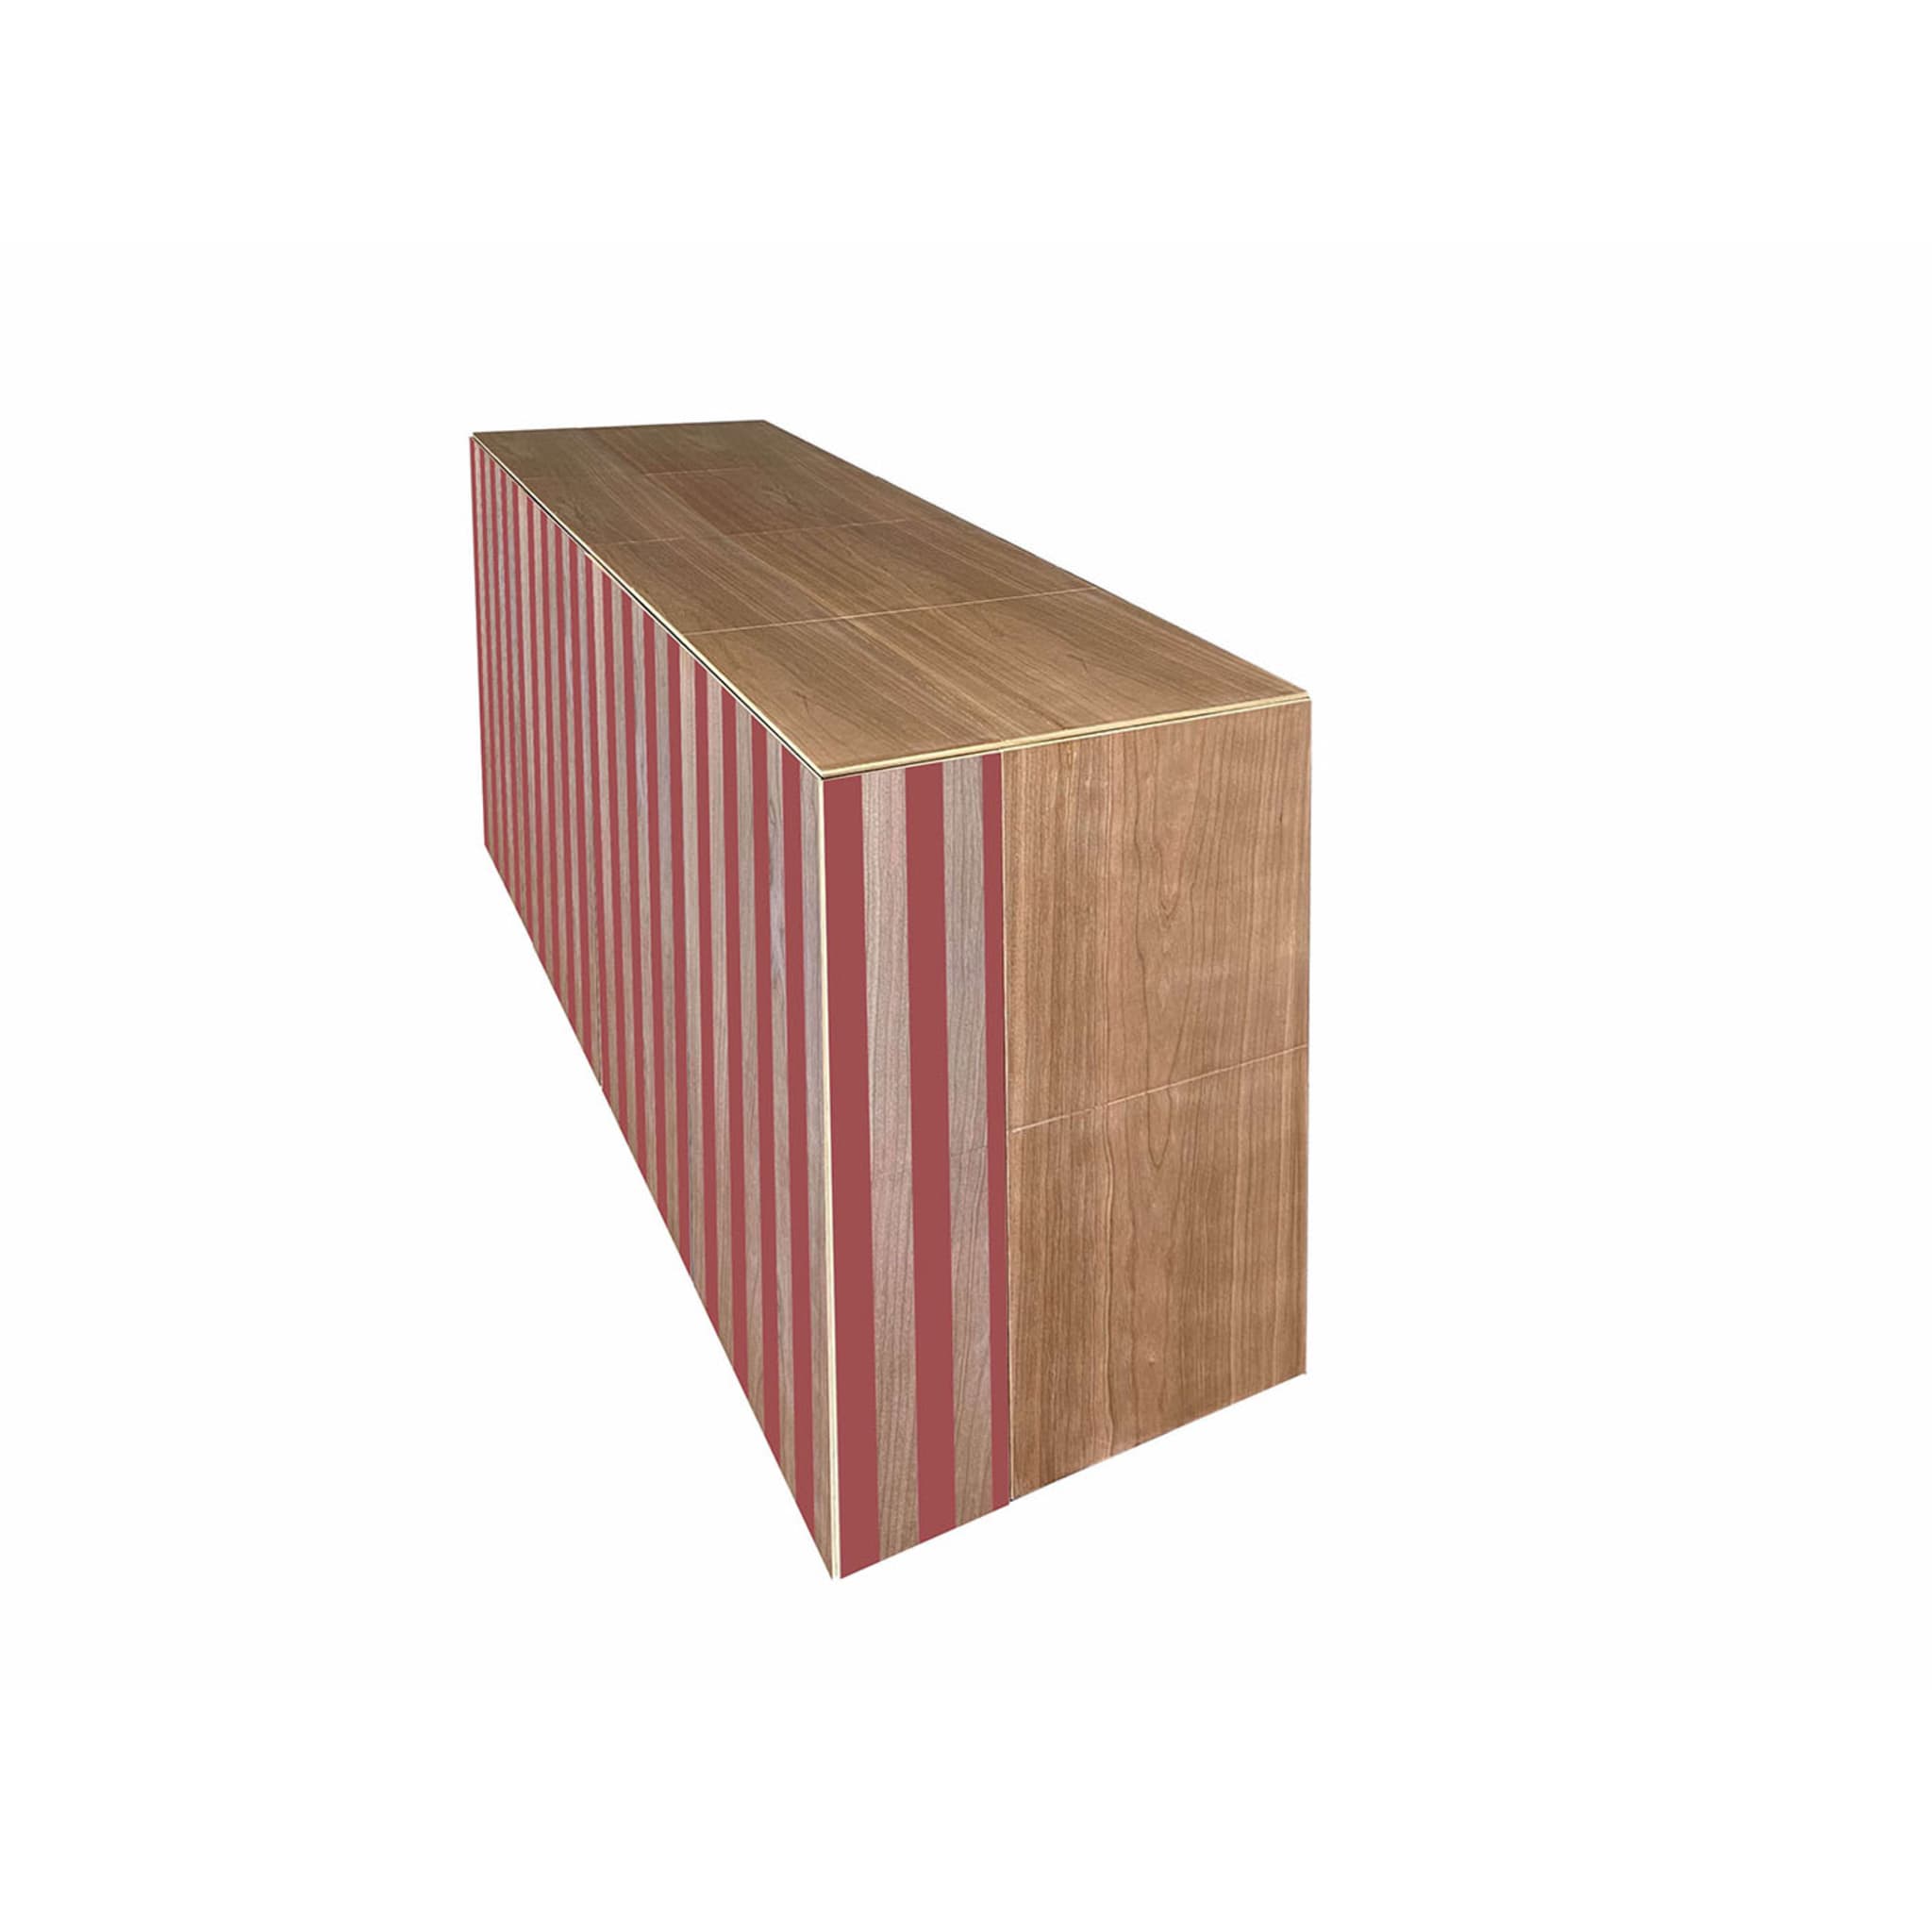 Md6 4-Door Striped Sideboard by Meccani Studio - Alternative view 2